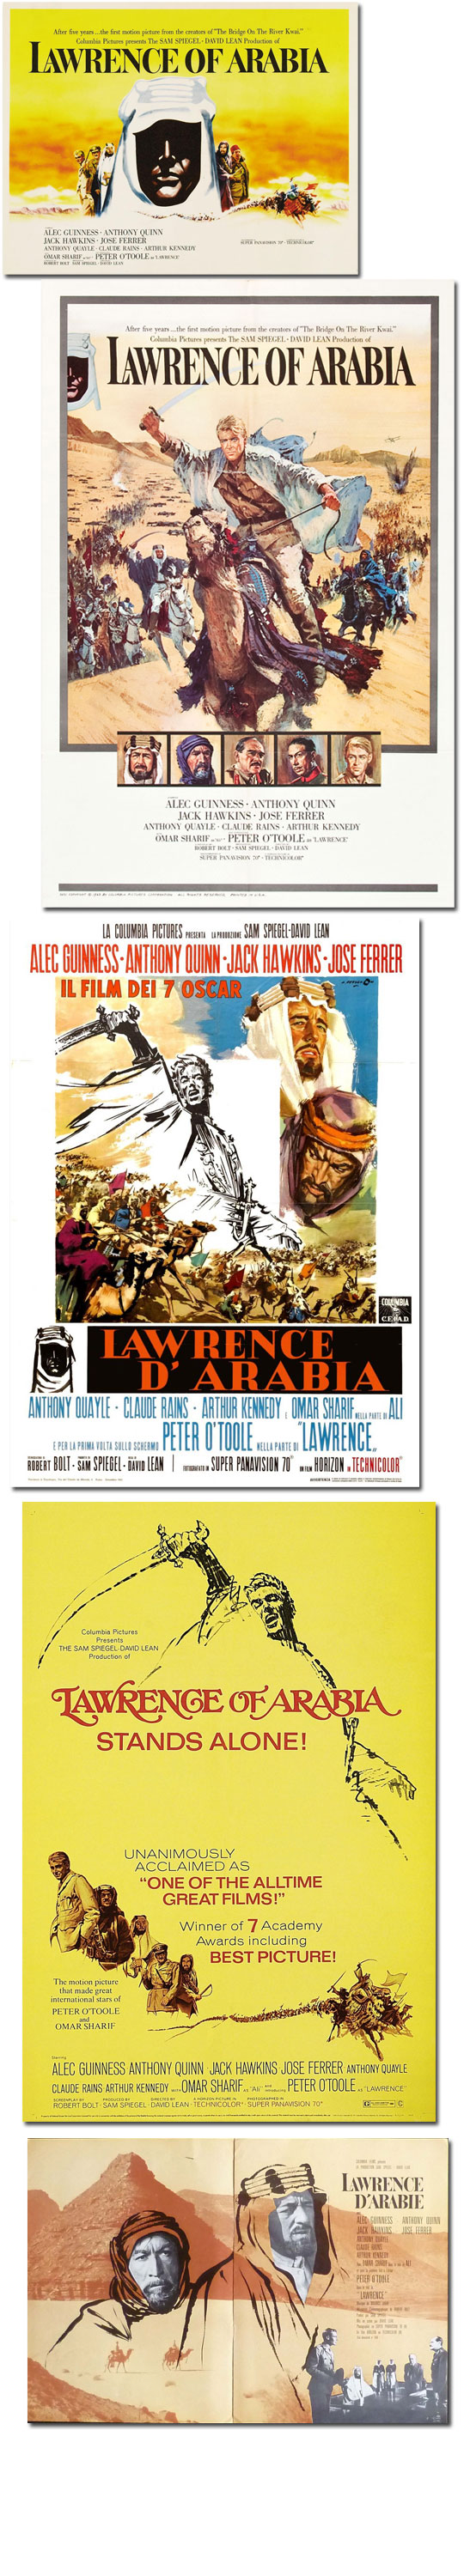 lawrence of arabia posters